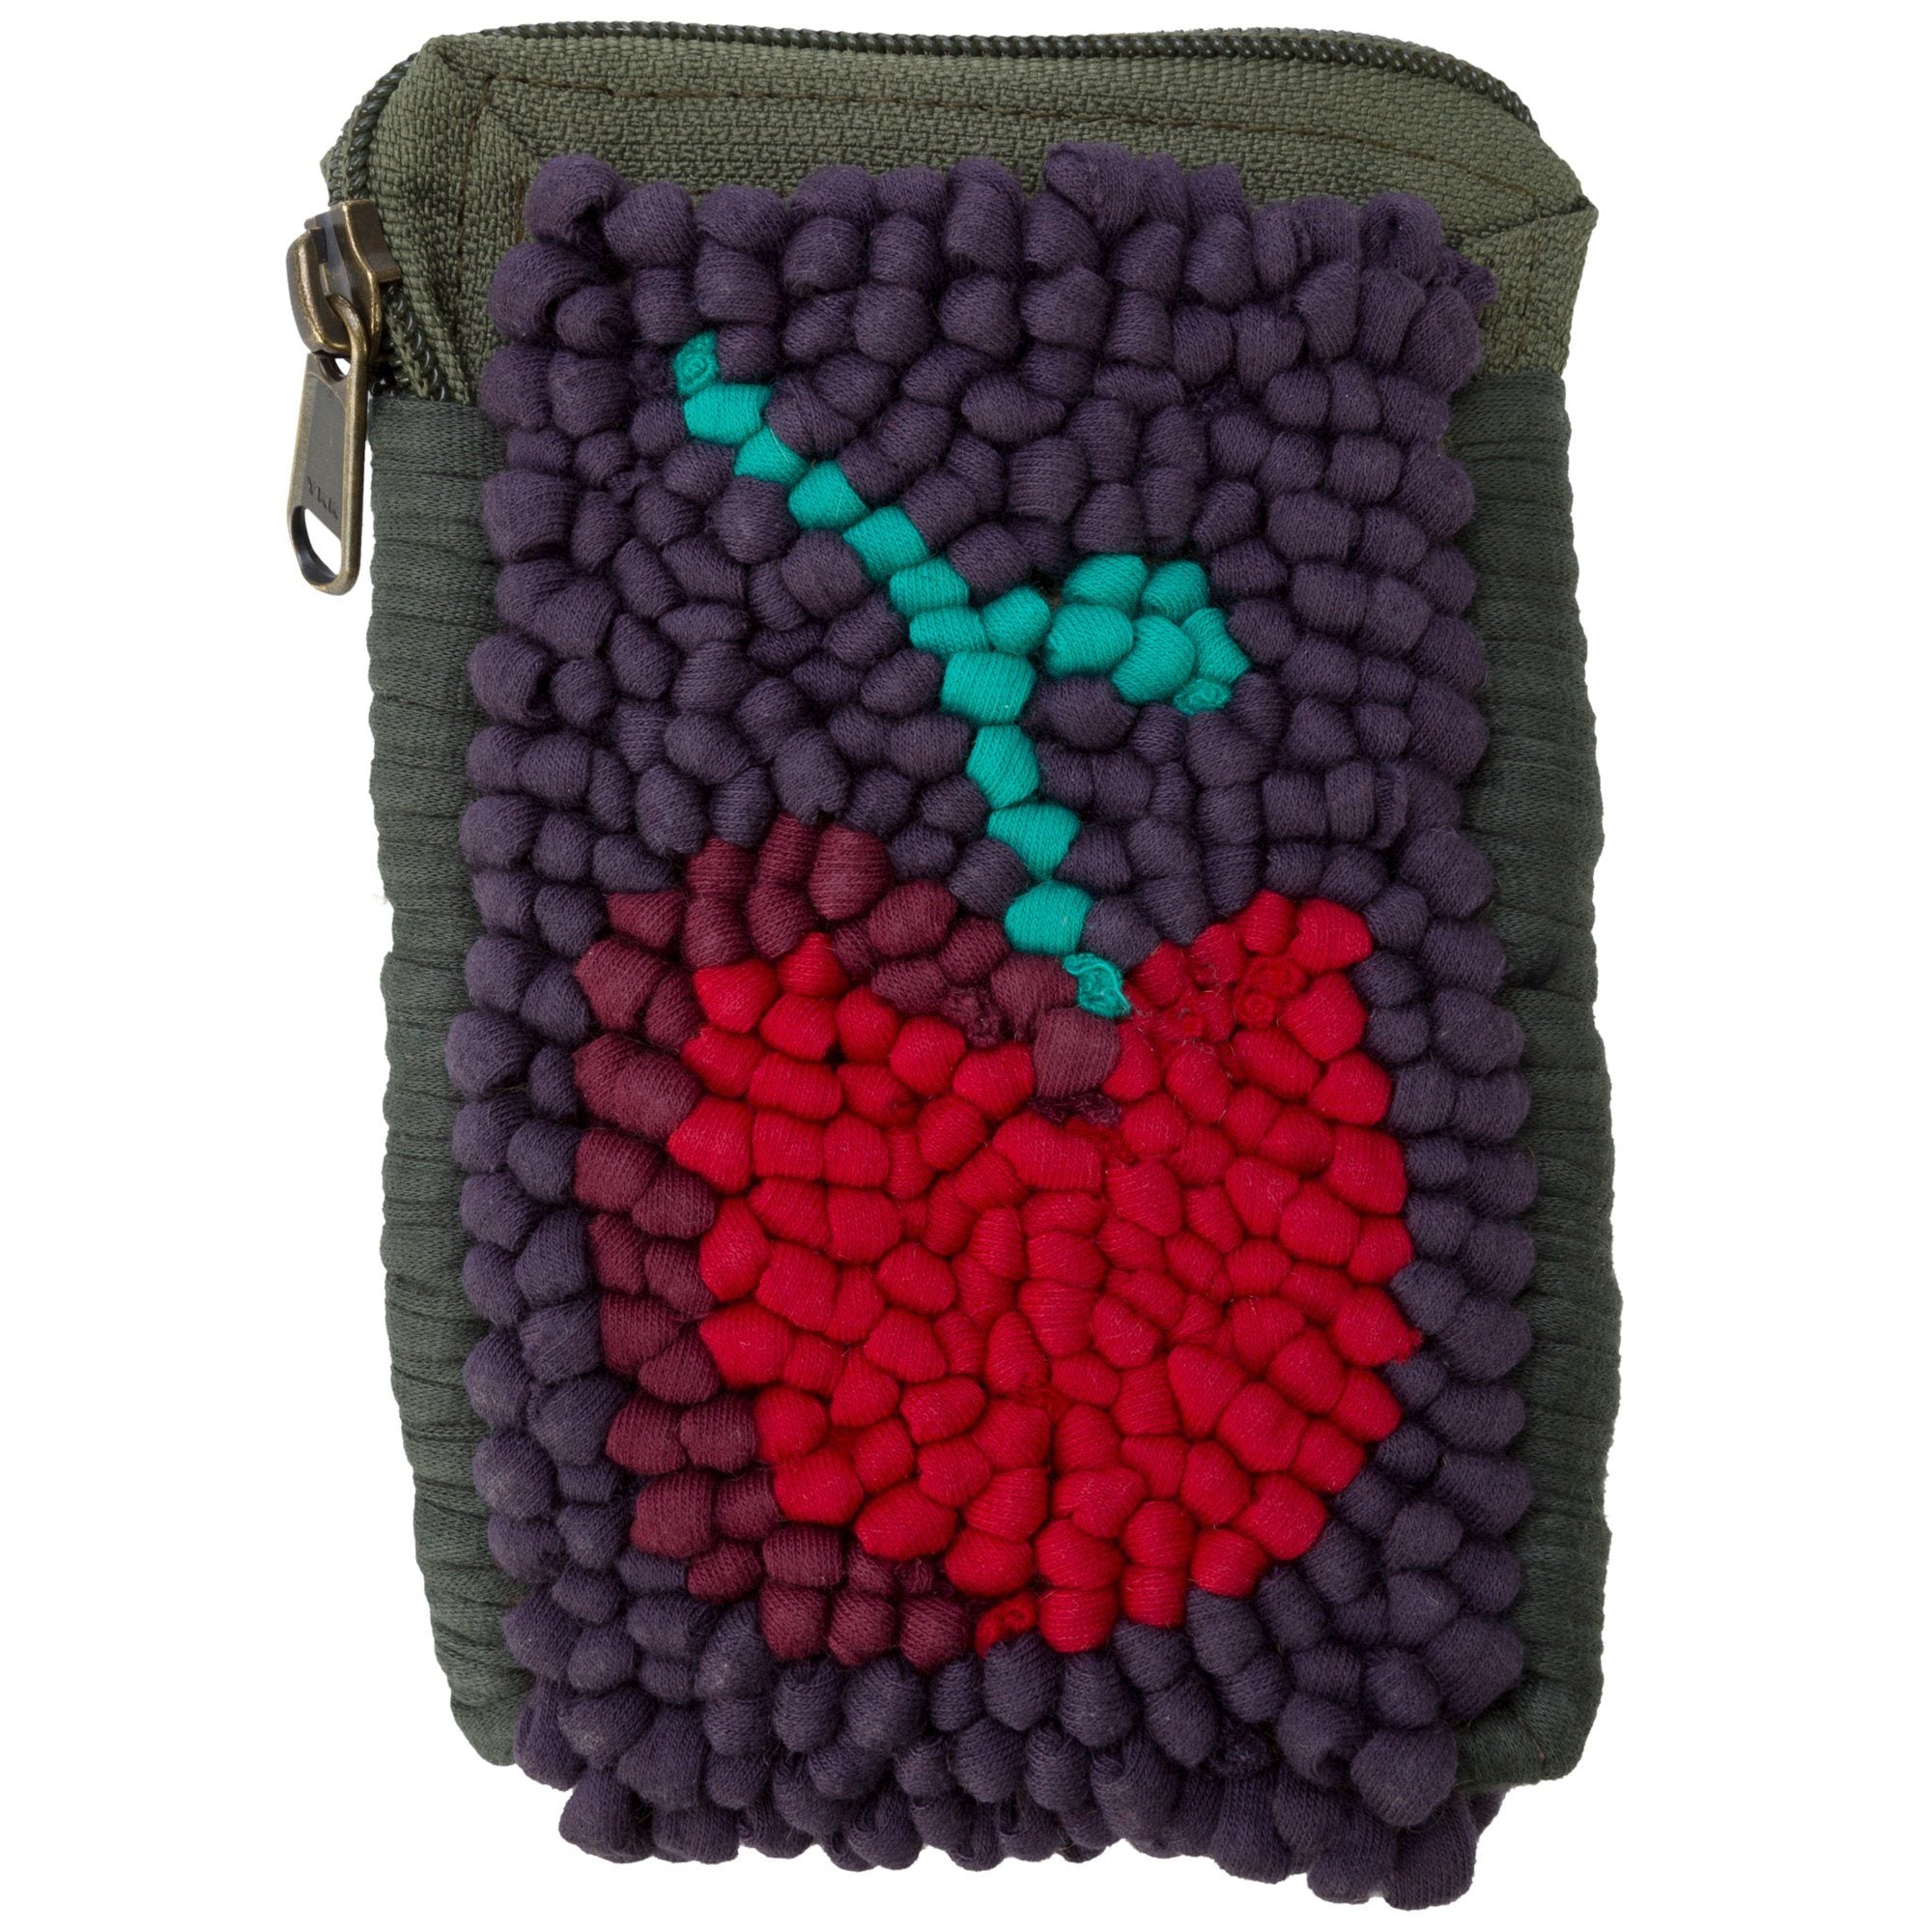 Mielie Gadget Pouch - Poppy - Red/Black